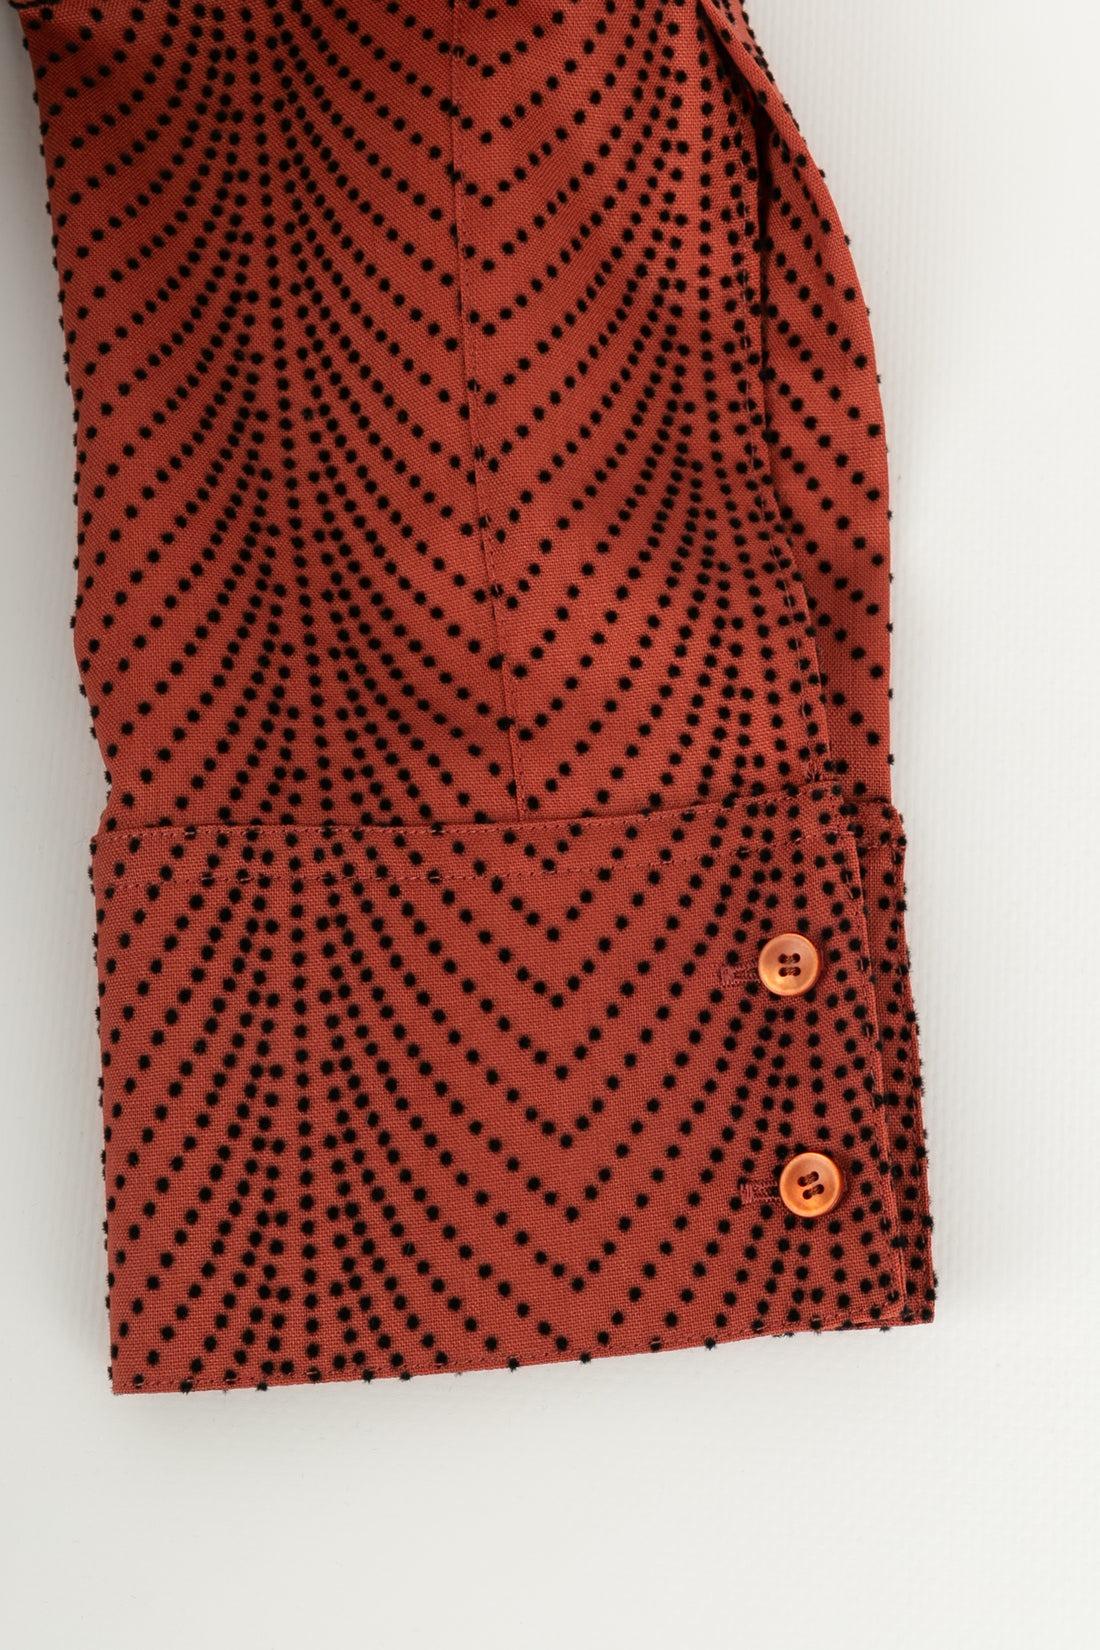 Alaïa Long Flared Dress in Brown/Orange Wool with Black Dots For Sale 2